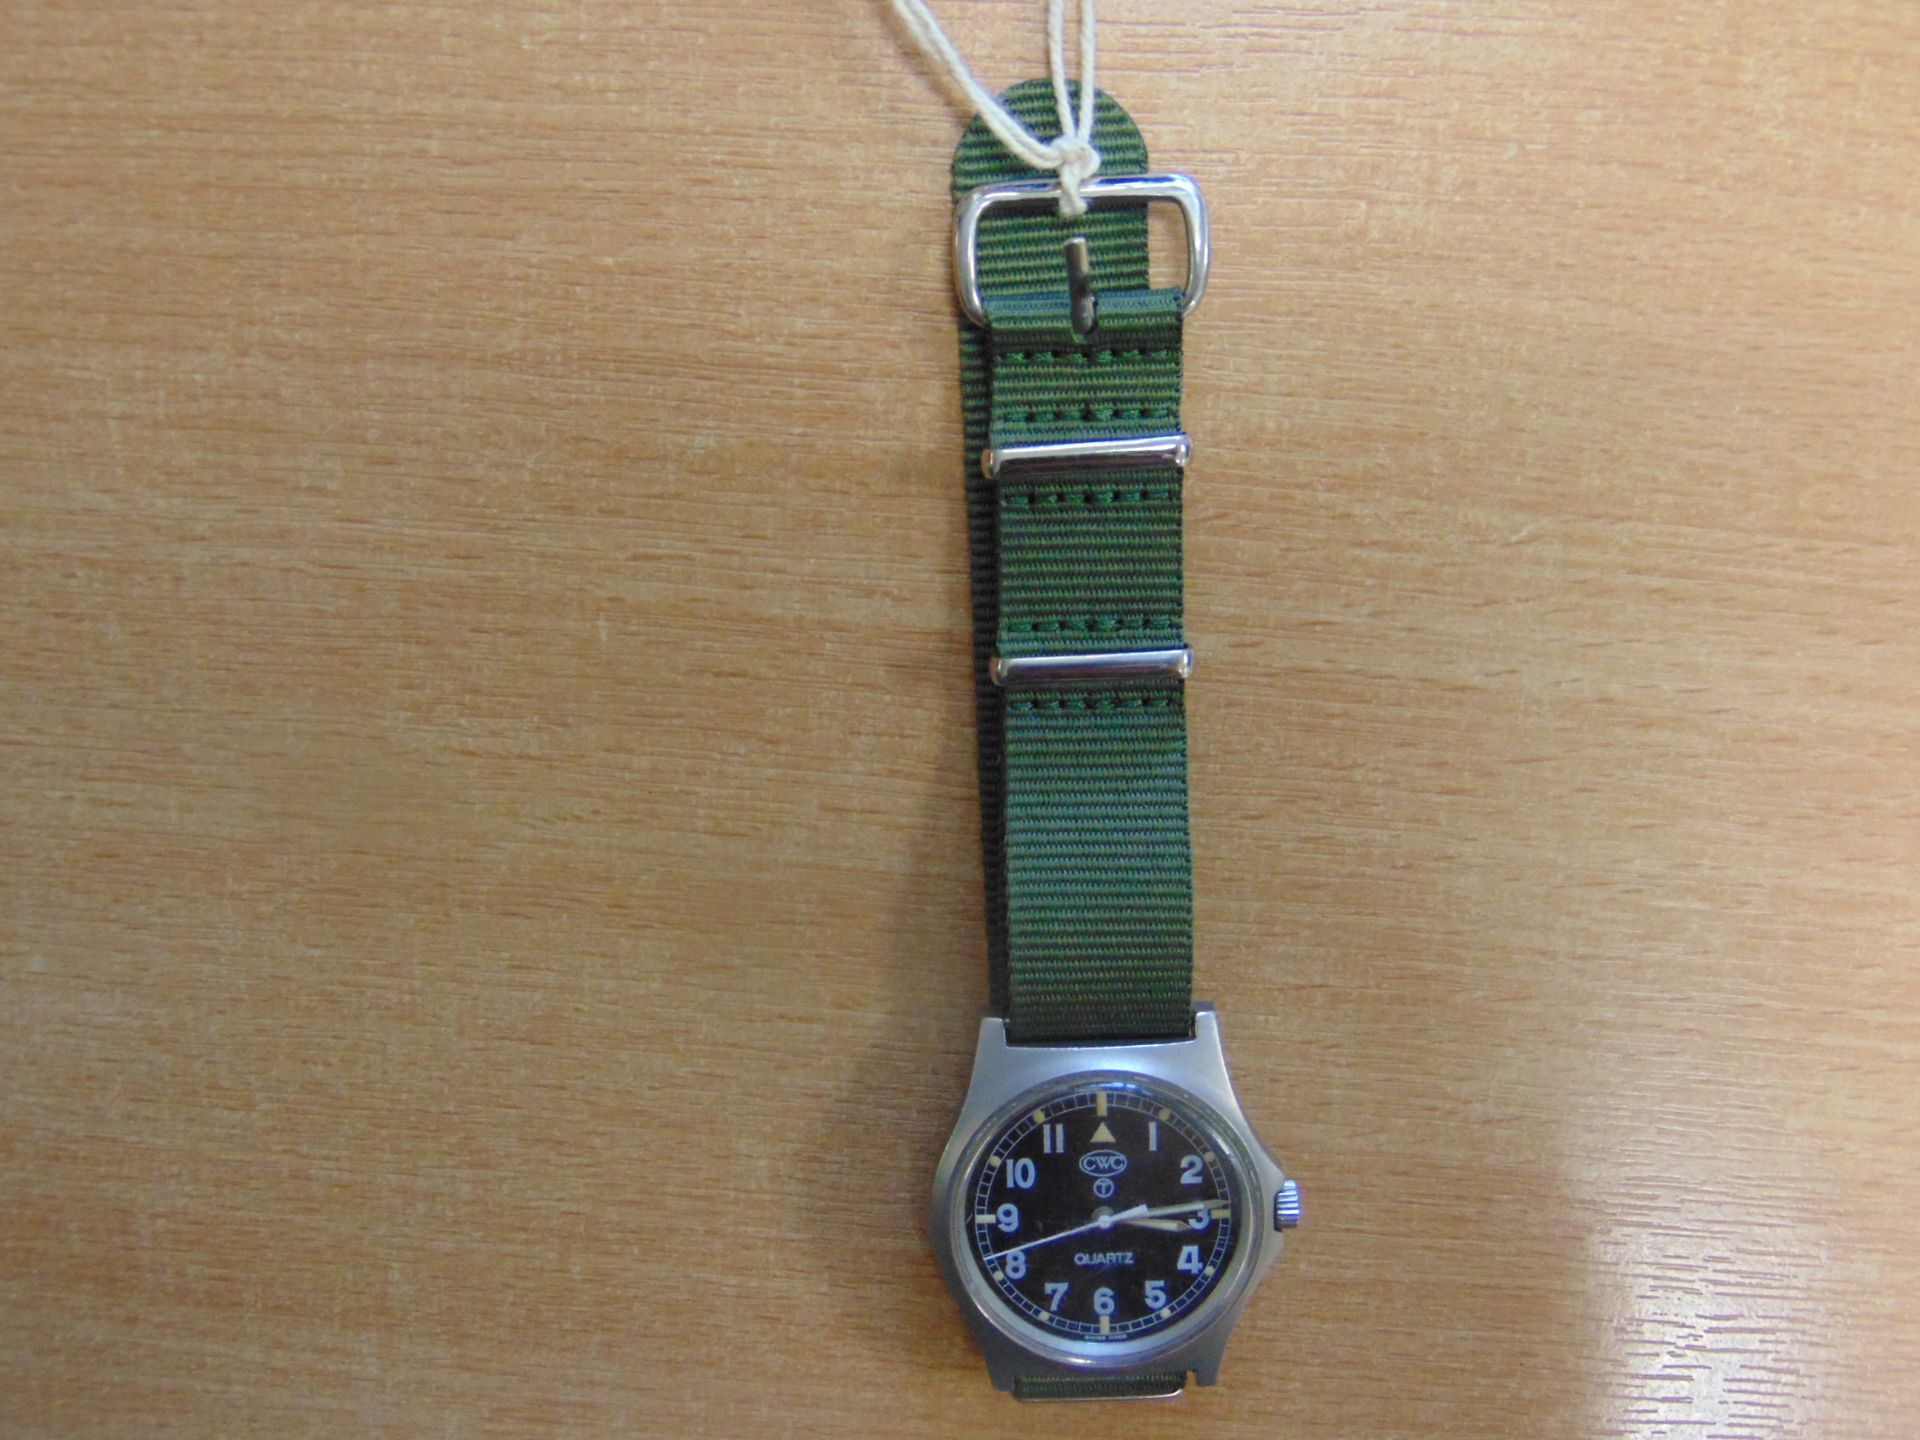 V. RARE C.W.C.0555 RM/NAVY ISSUE SERVICE WATCH DATED 1995 - Image 3 of 7